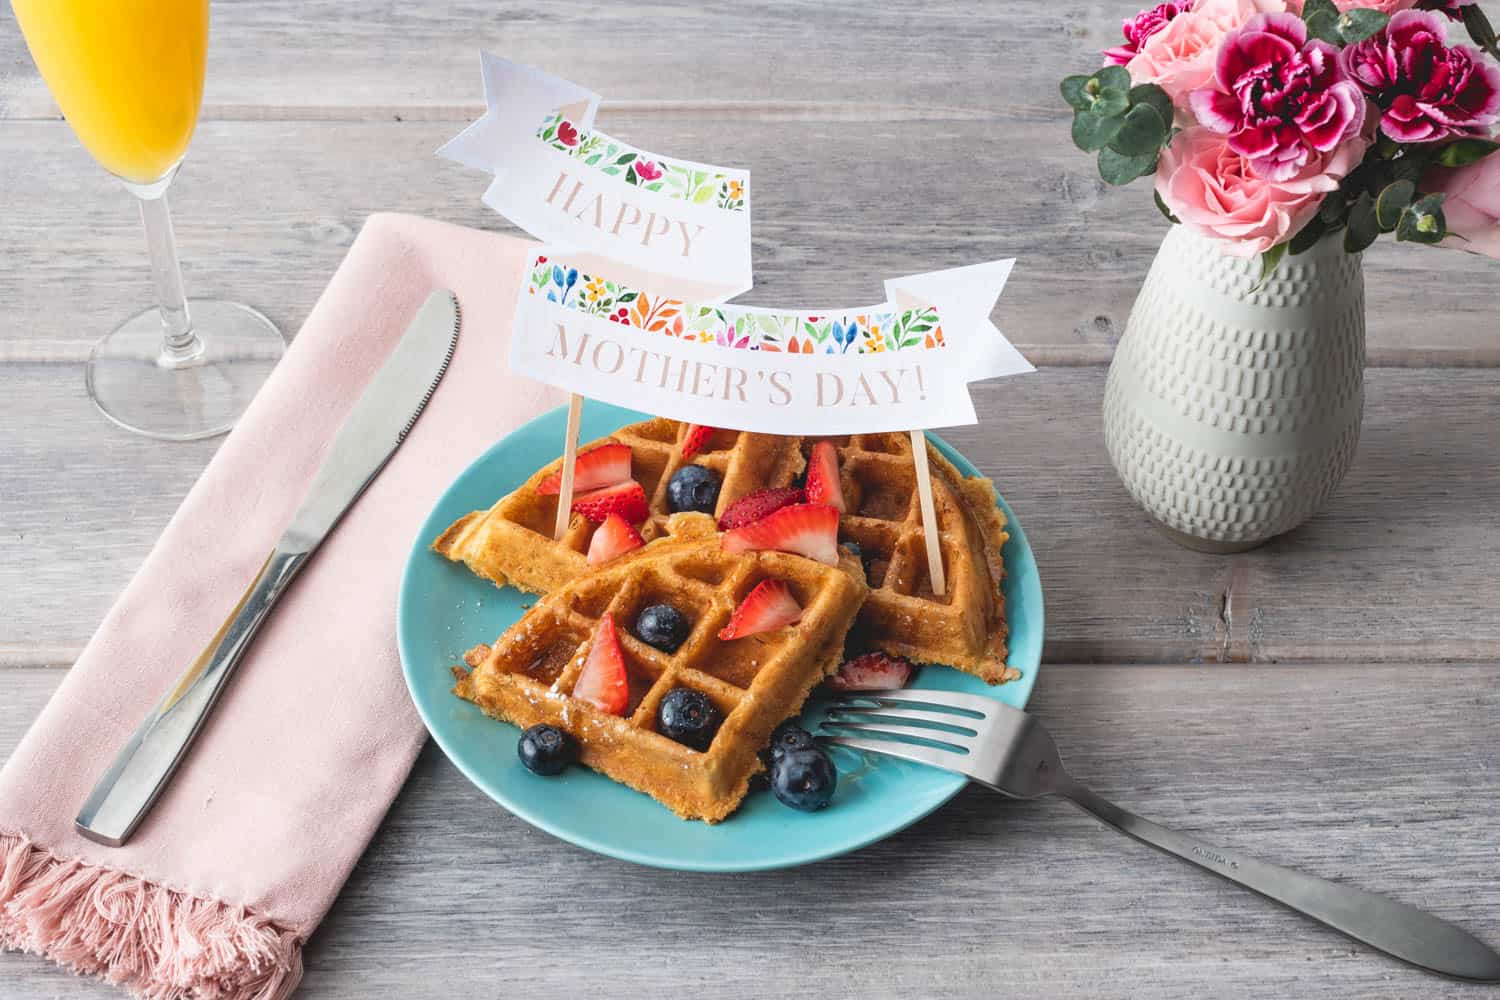 17 Frugal and Free Mother's Day Gift Ideas - Happy Mother's Day free printable banner on breakfast in bed blue plate with waffle and fresh fruit. 